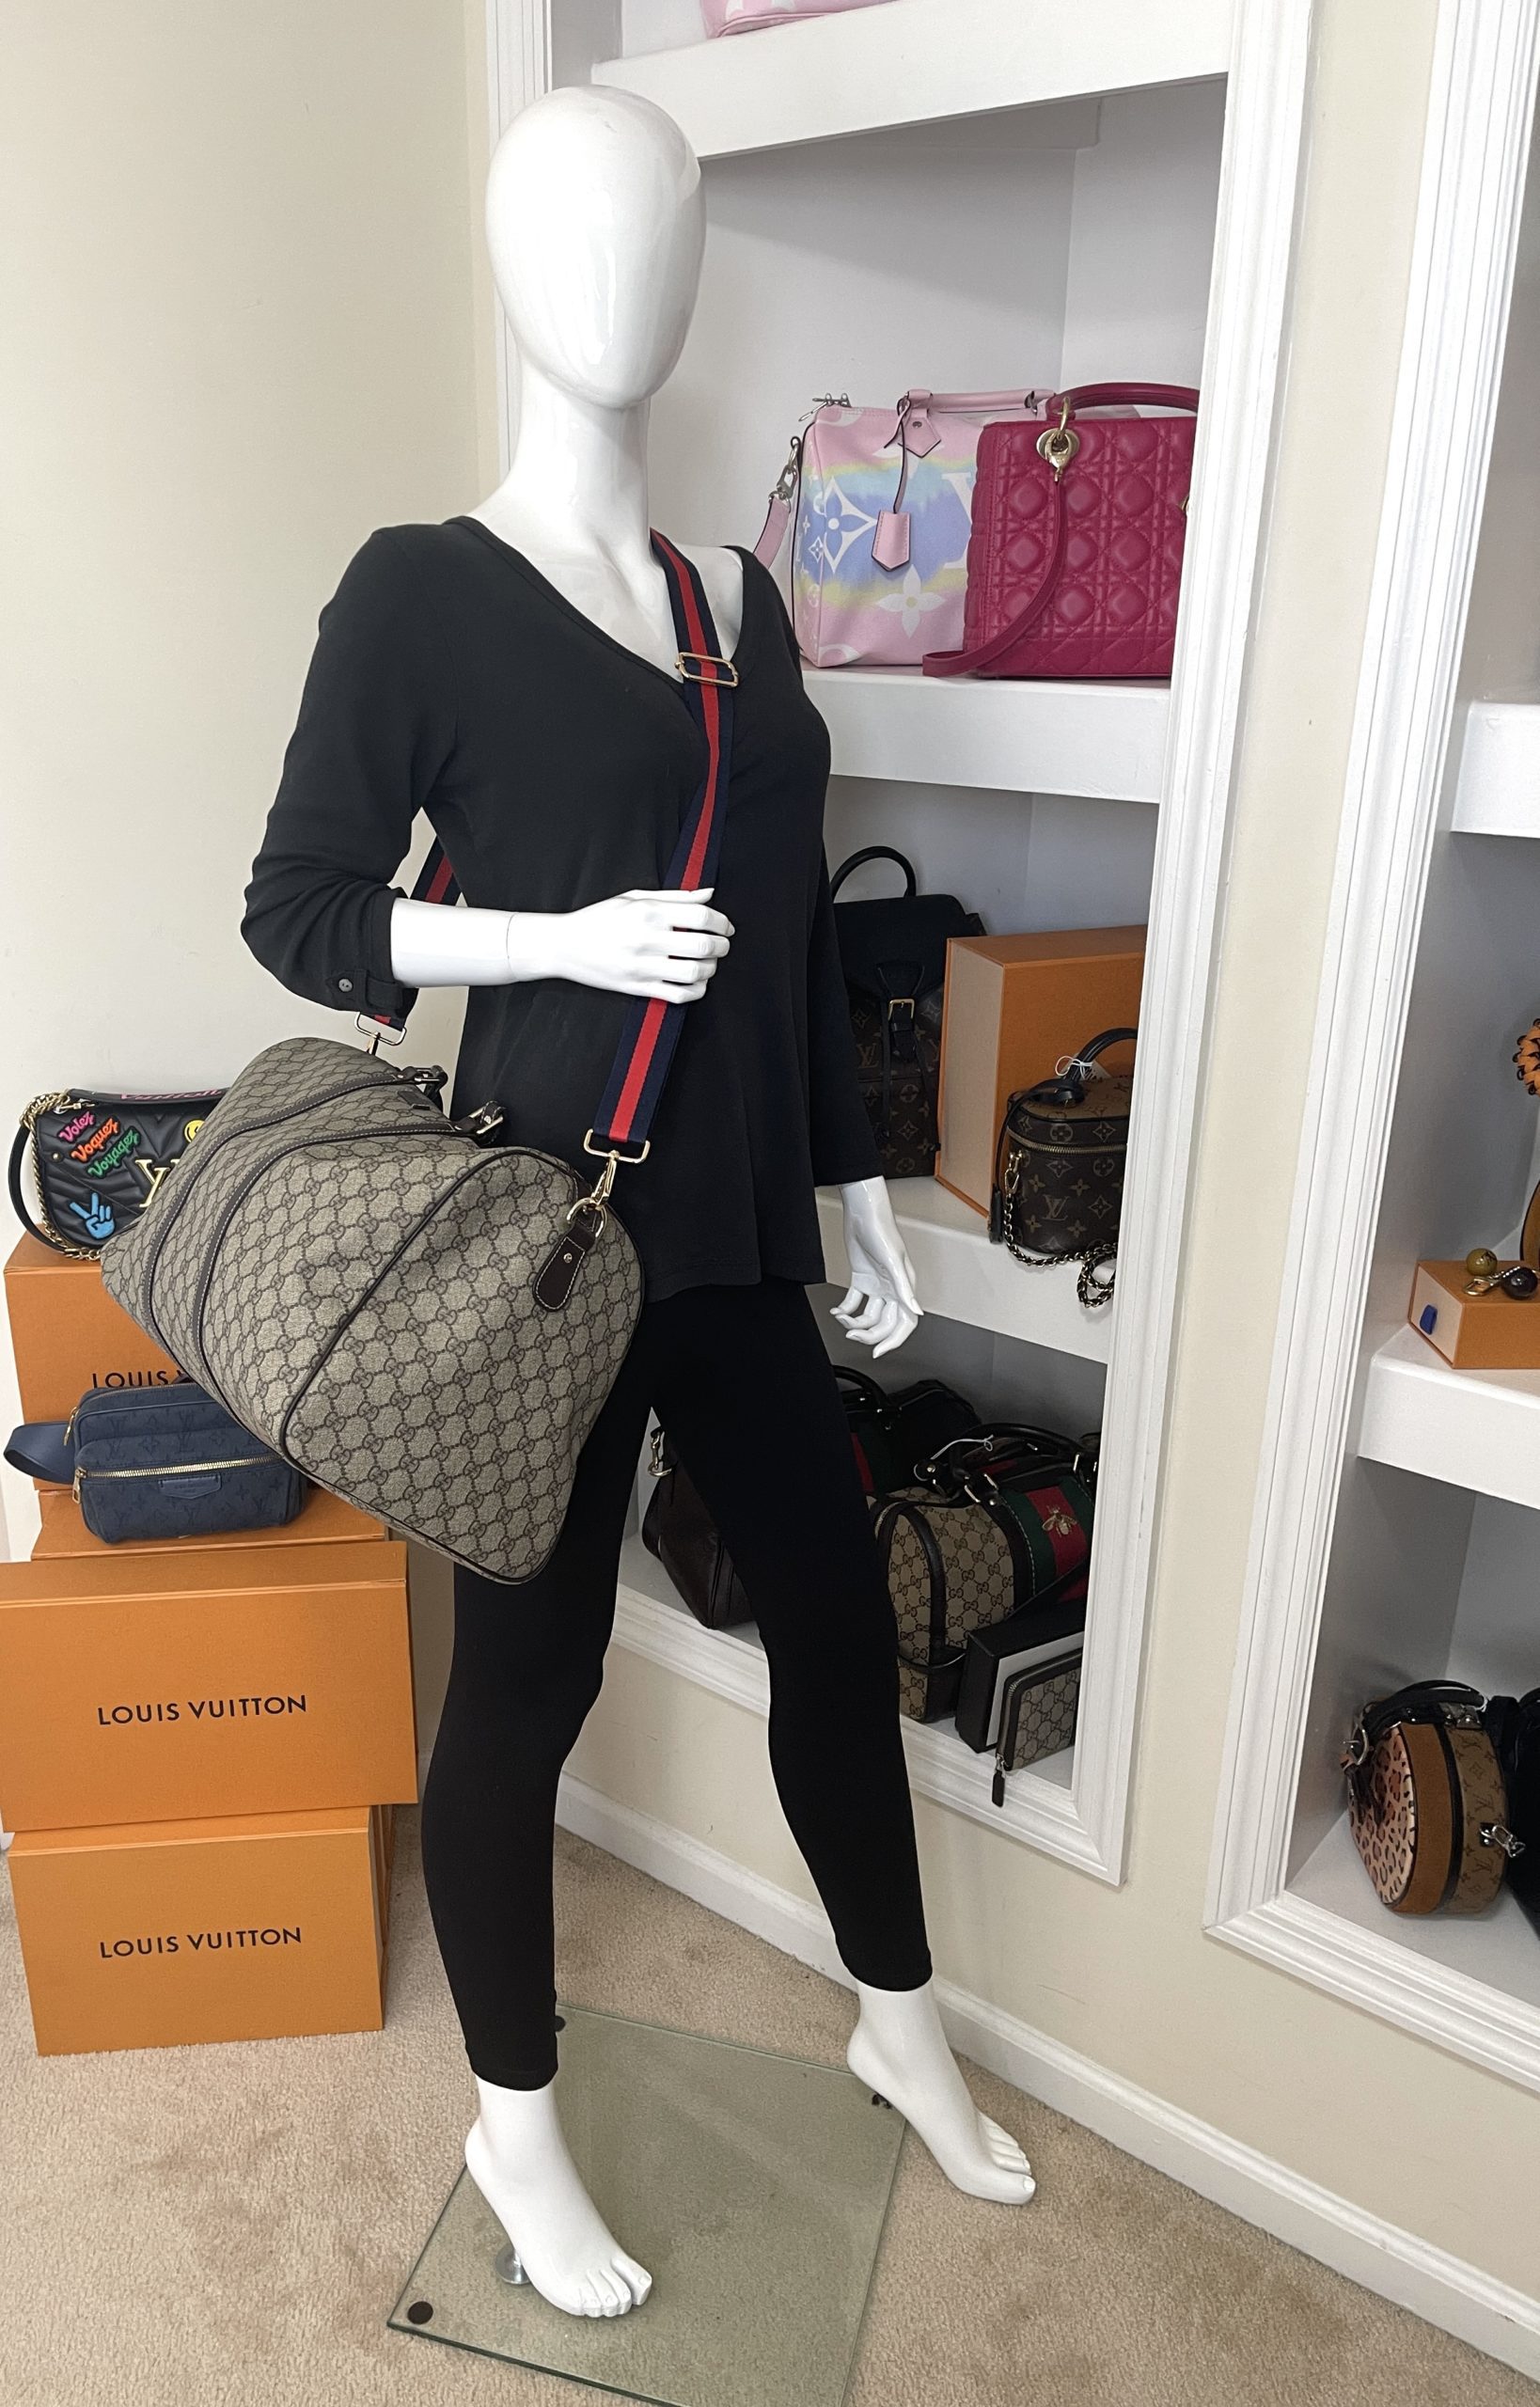 Gucci, Bags, Gucci Neverfull Style Tote